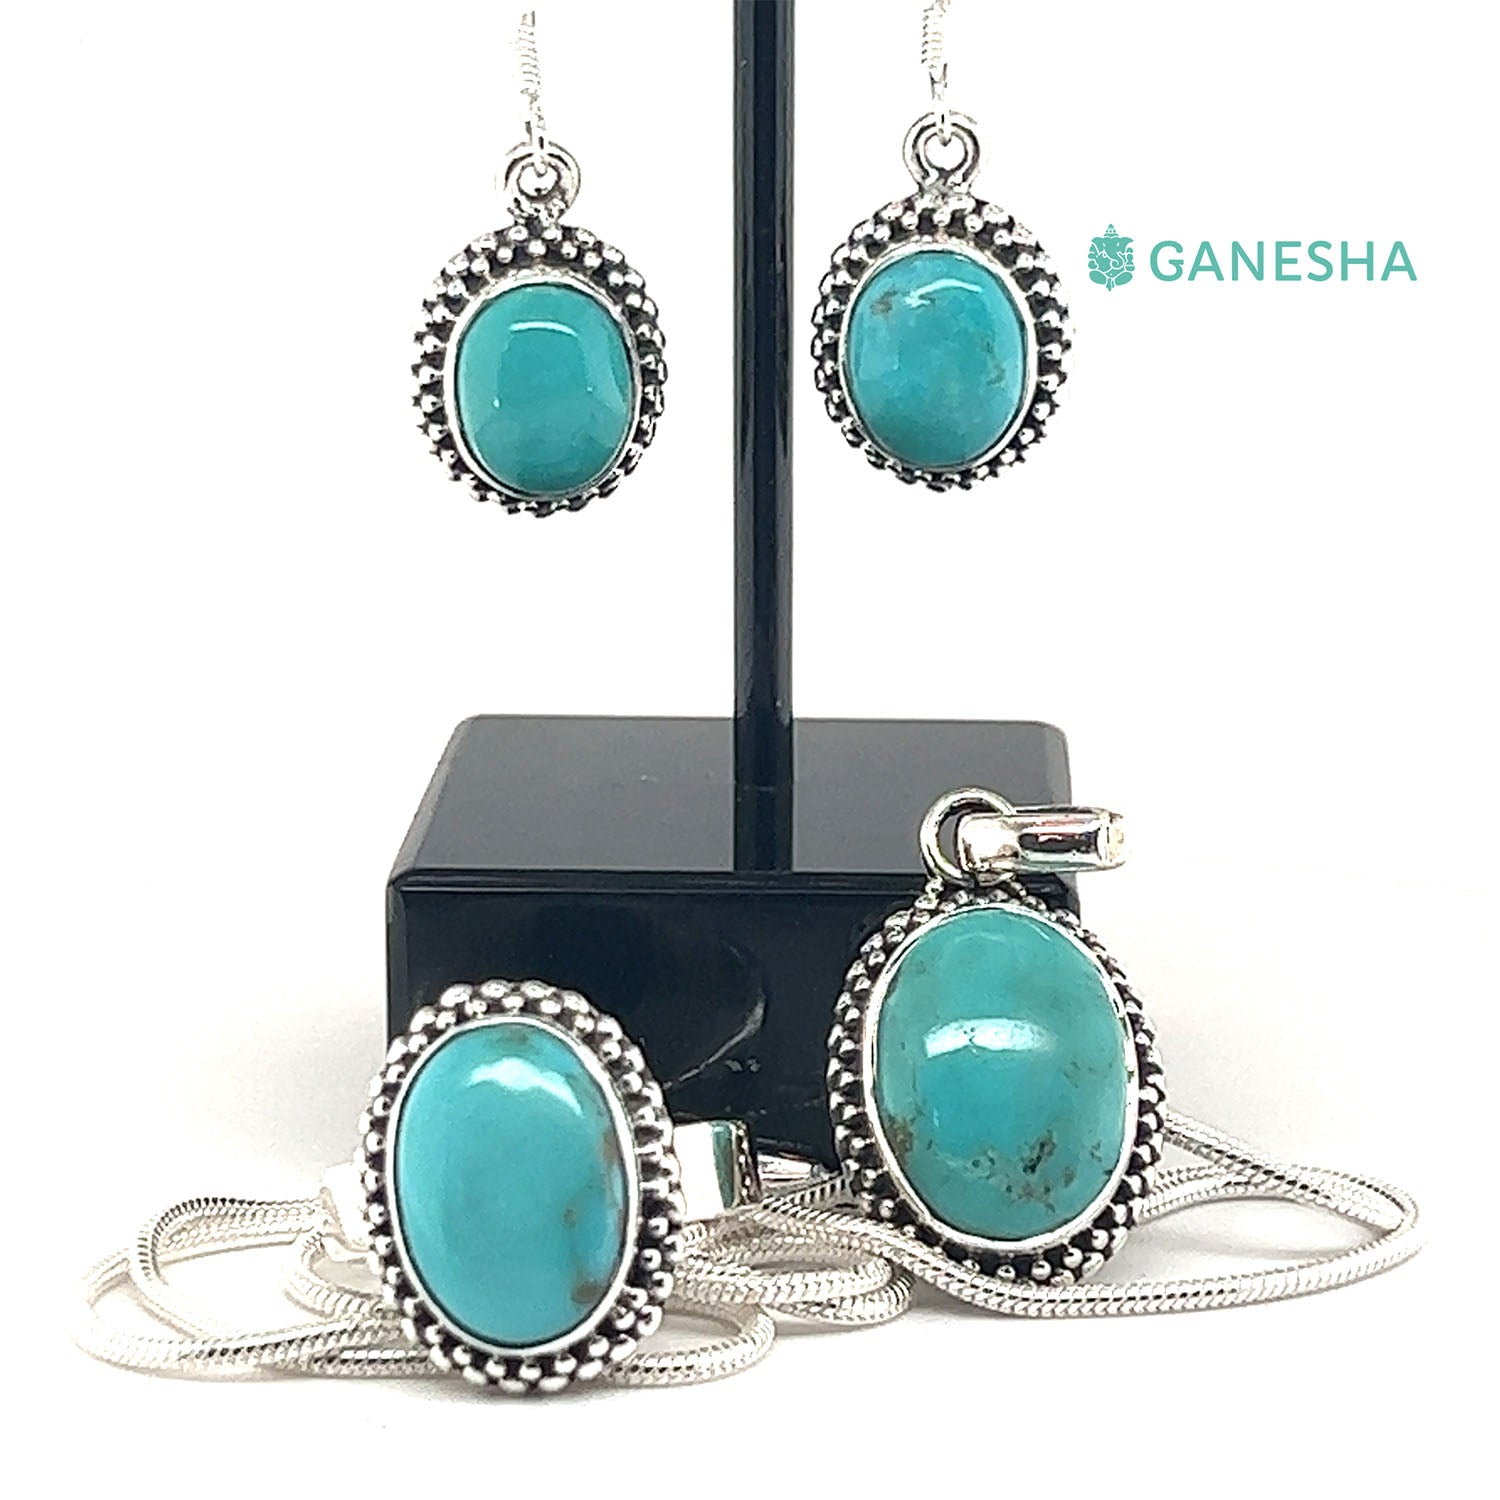 Ganesha - handigraft -Turquoise - Sterling-Silver-Jewellery-Gift-Set-With-free-Chain